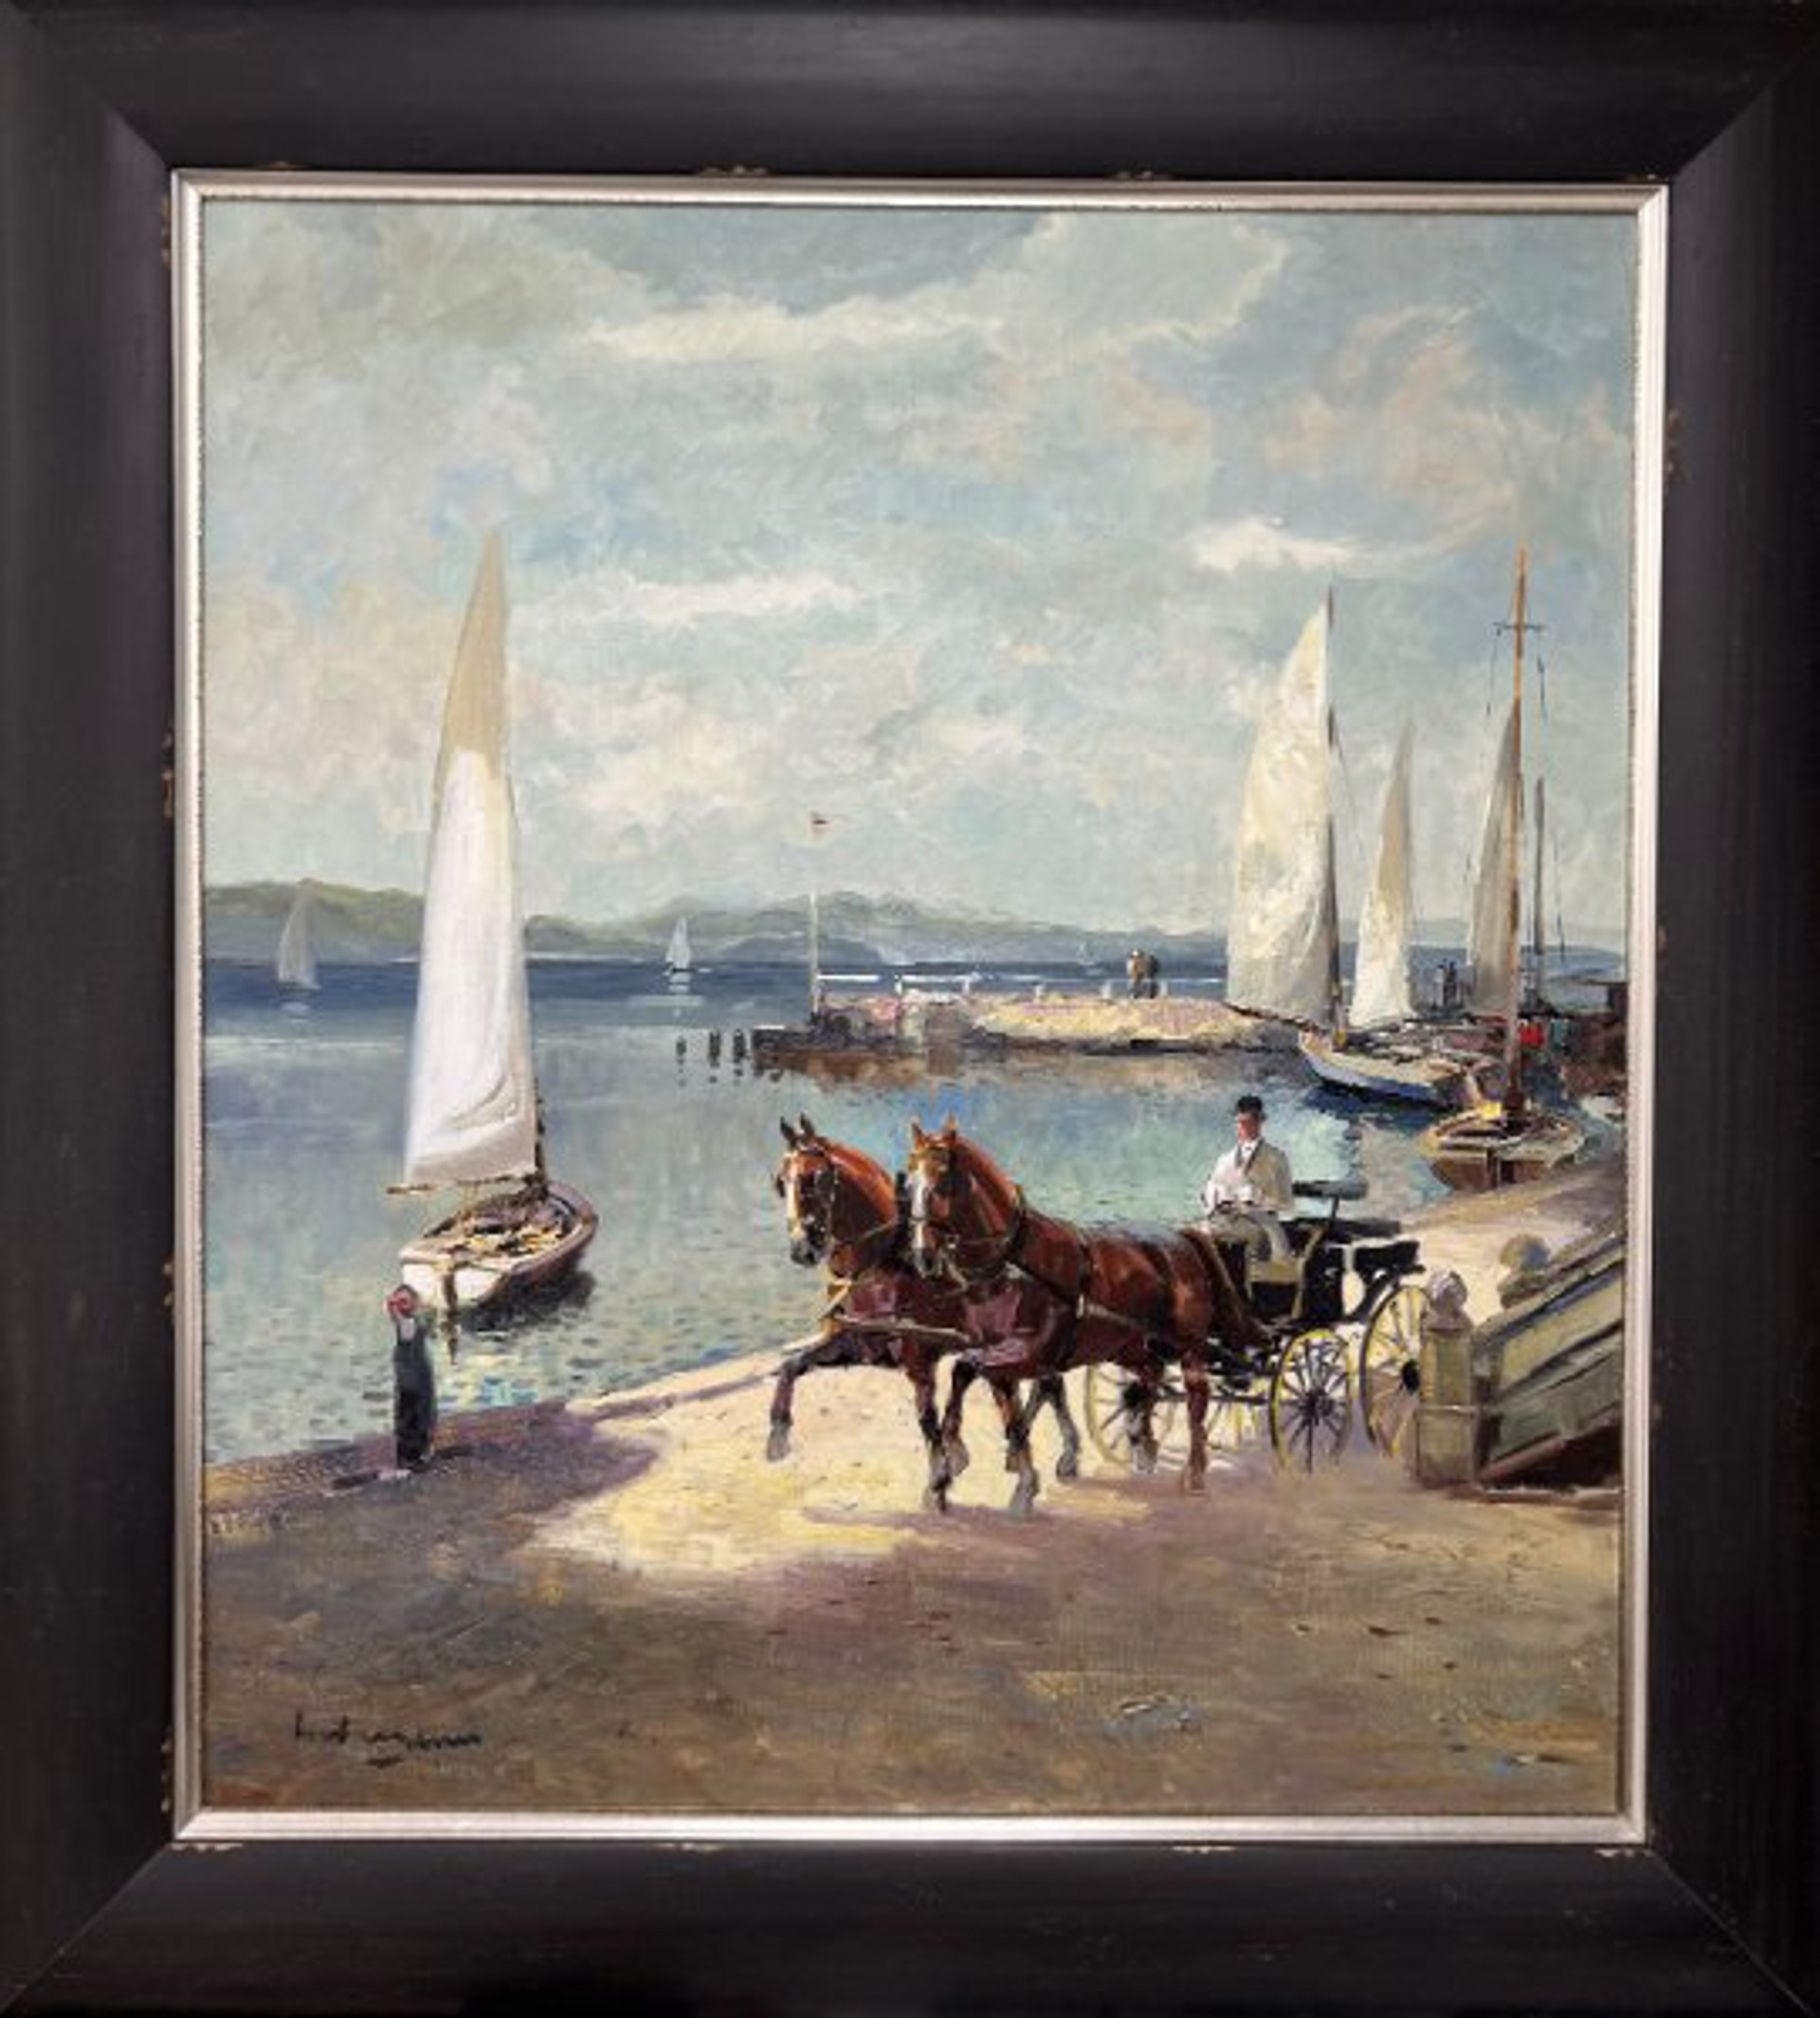 Summertime Ride by The Sea in aHorsedrawn Carriage by Ludwig Gschossmann